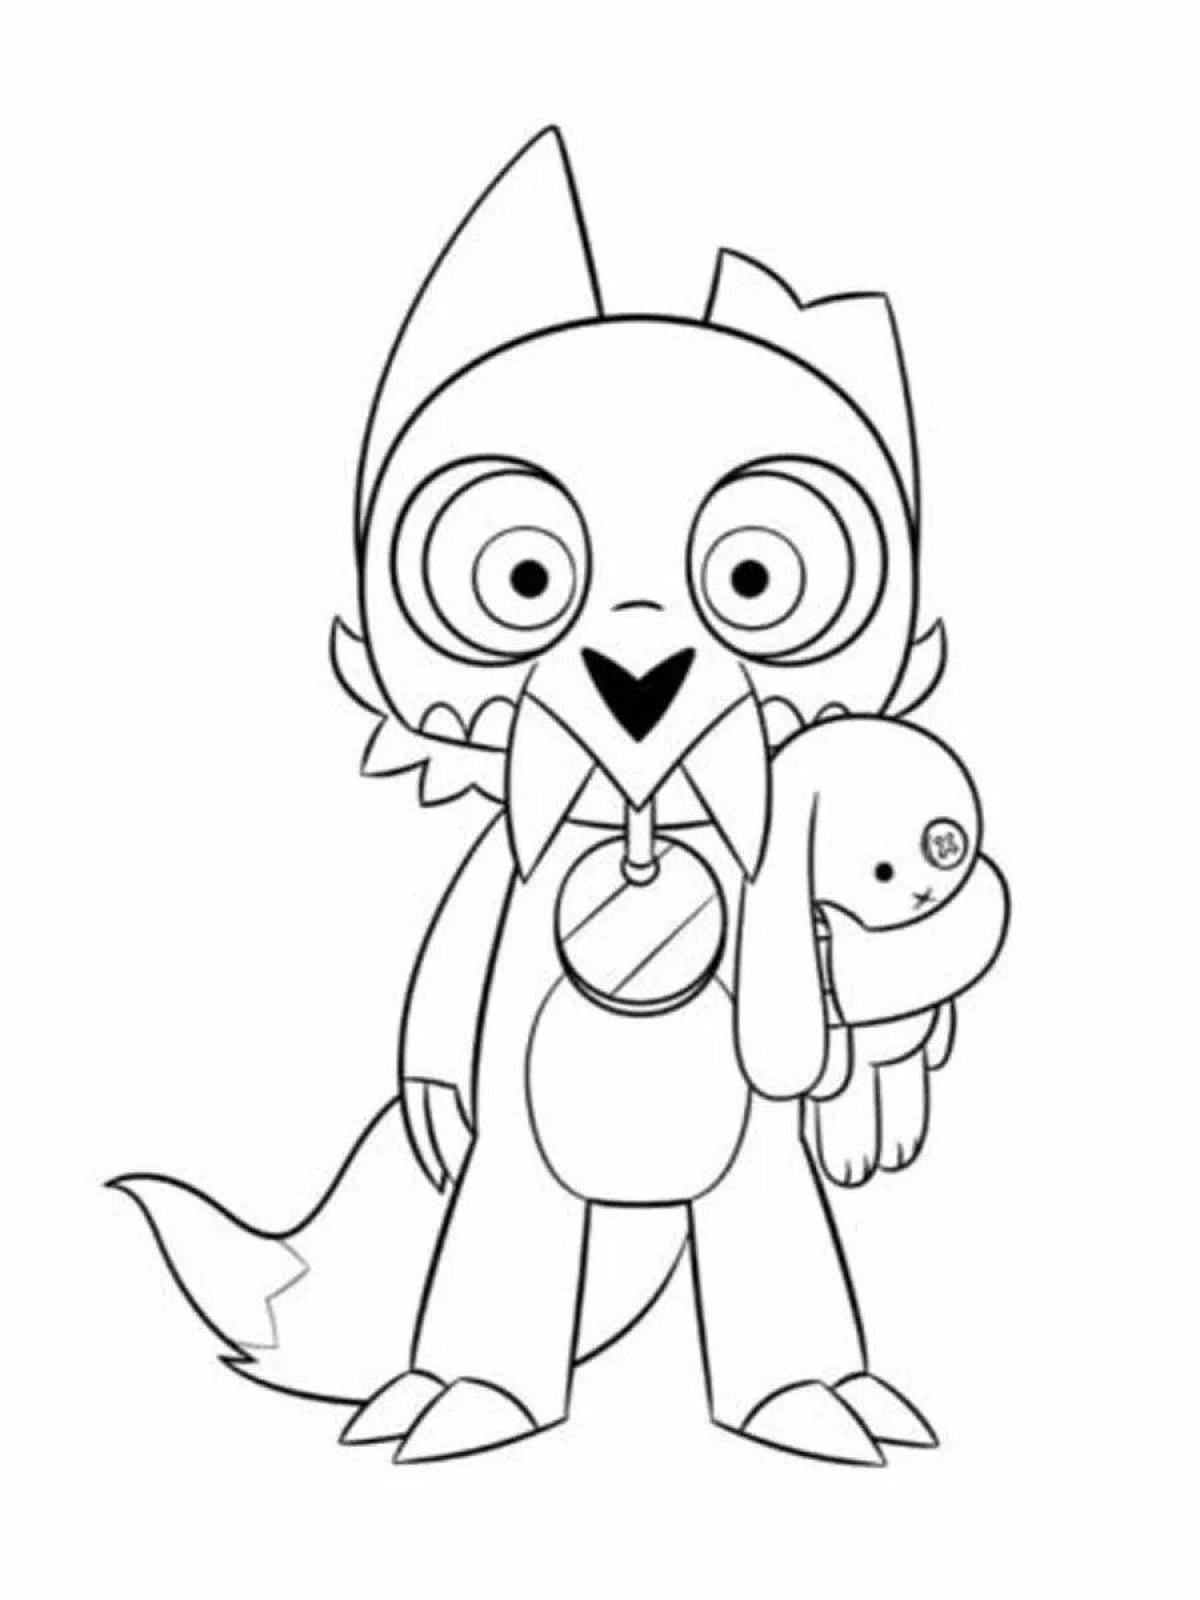 Adorable owl house coloring page luz